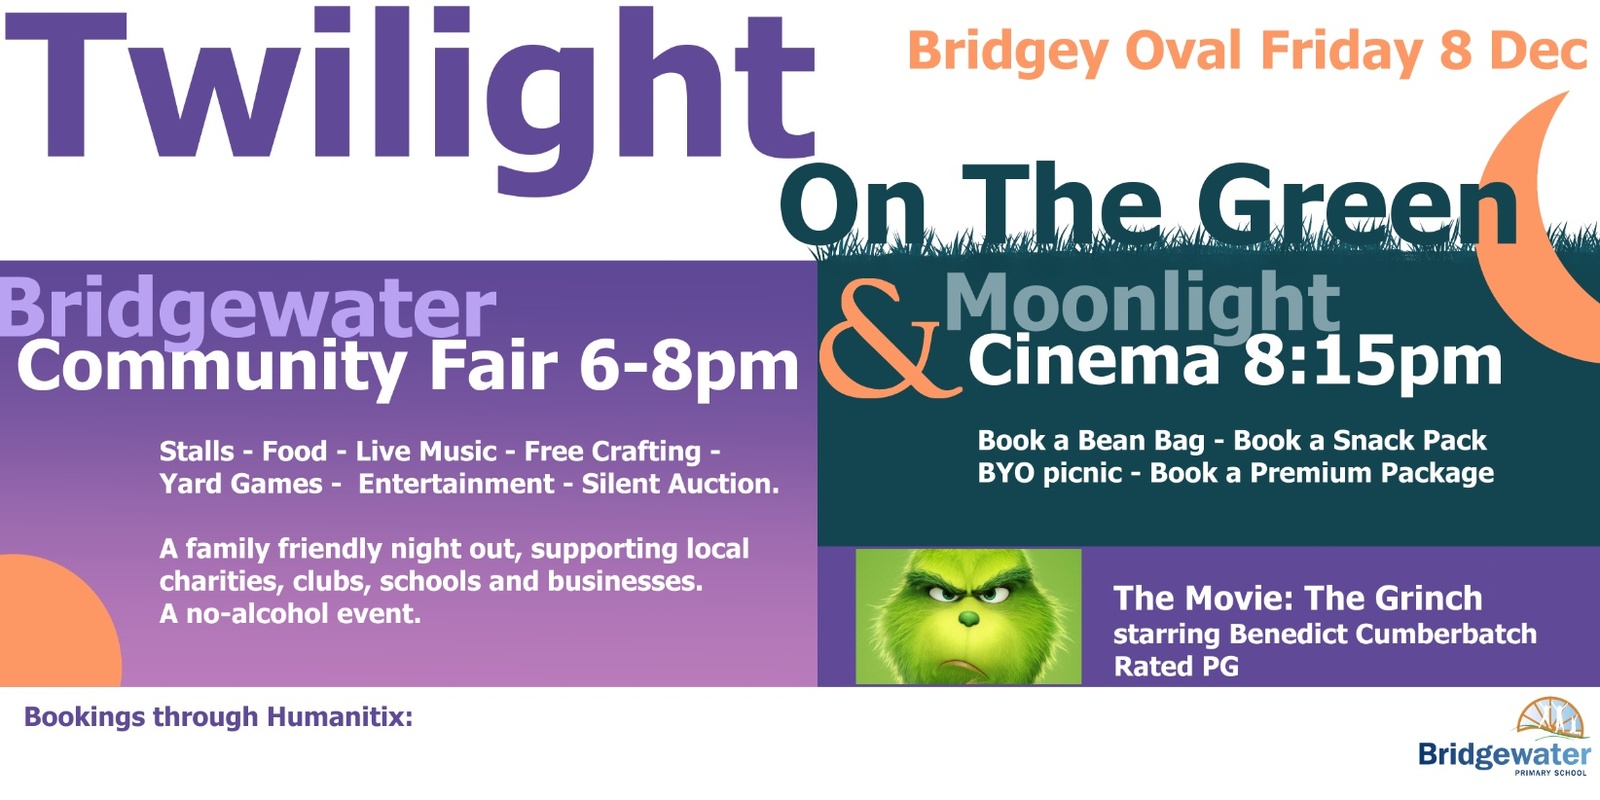 Banner image for CANCELLED  - EXTREME WEATHER WARNING - Twilight On The Green + Moonlight Cinema